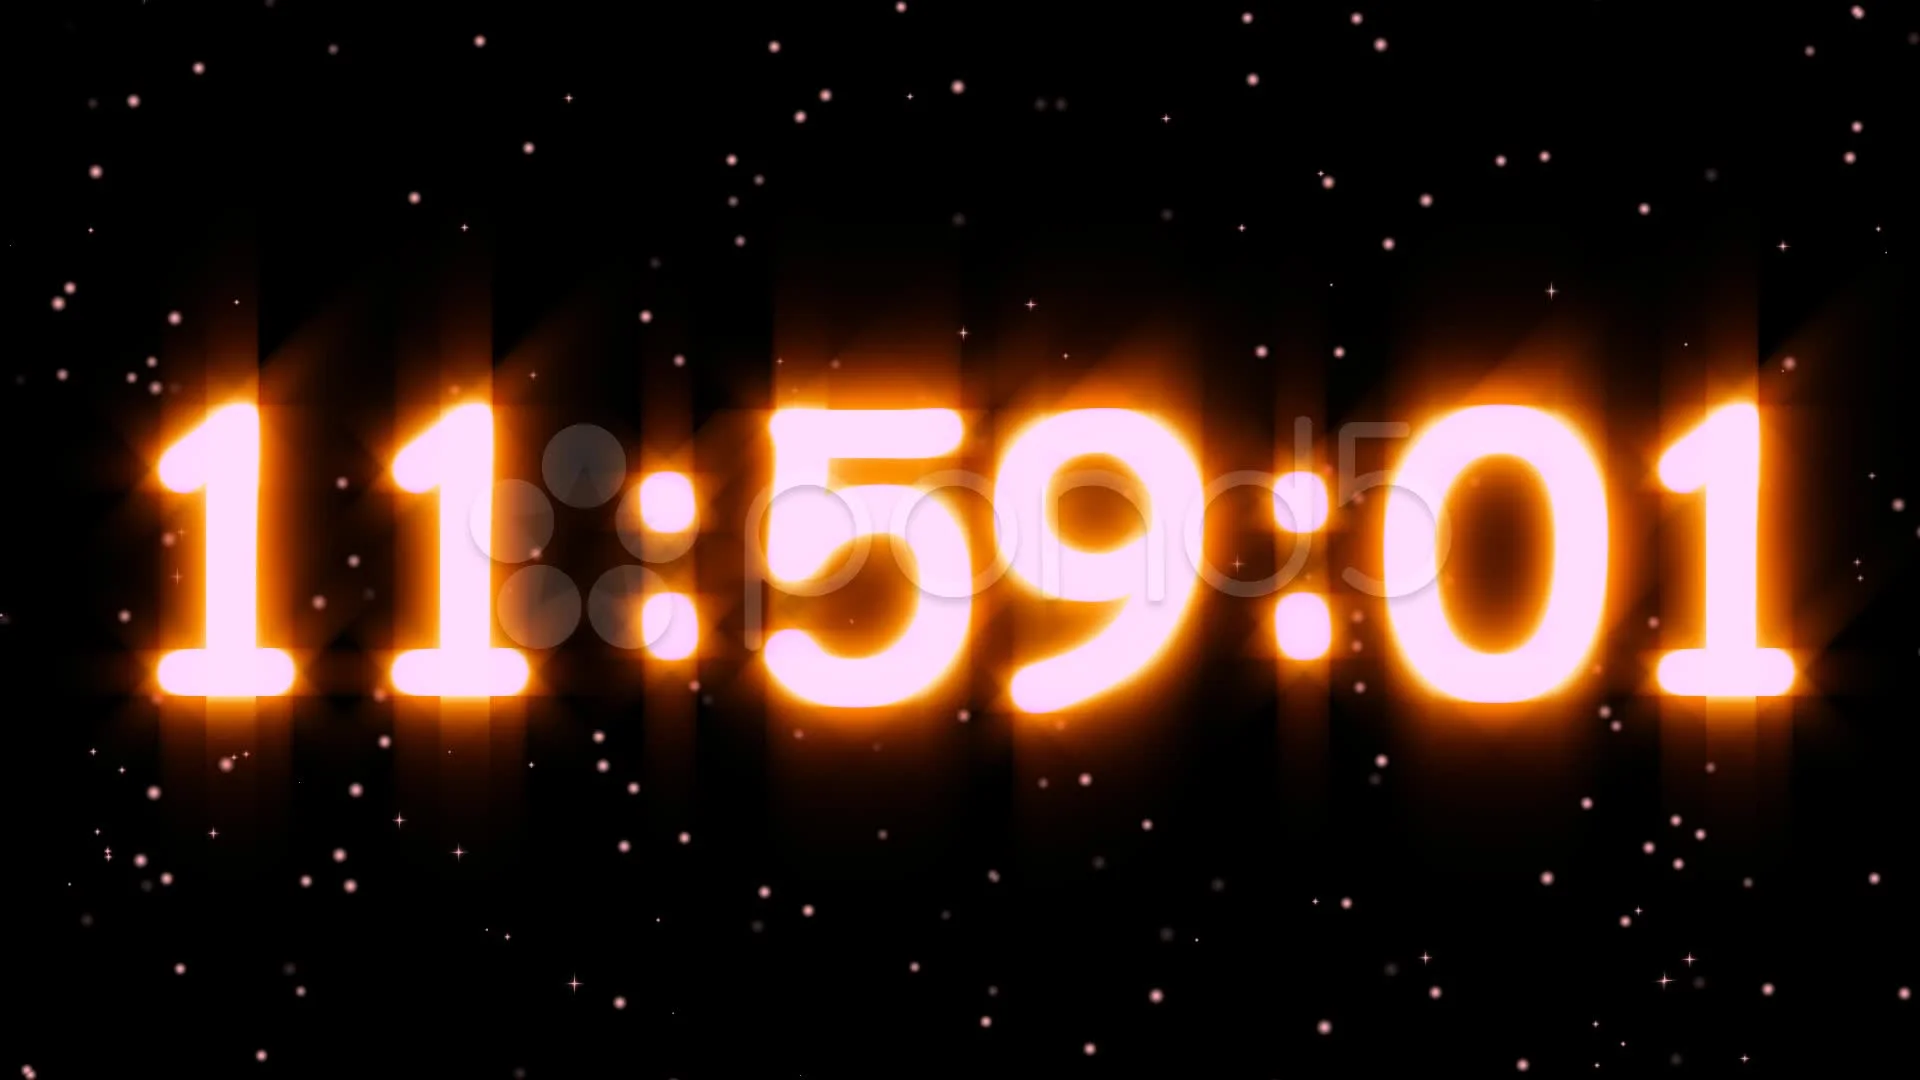 One Minute to Midnight Countdown Clock t...